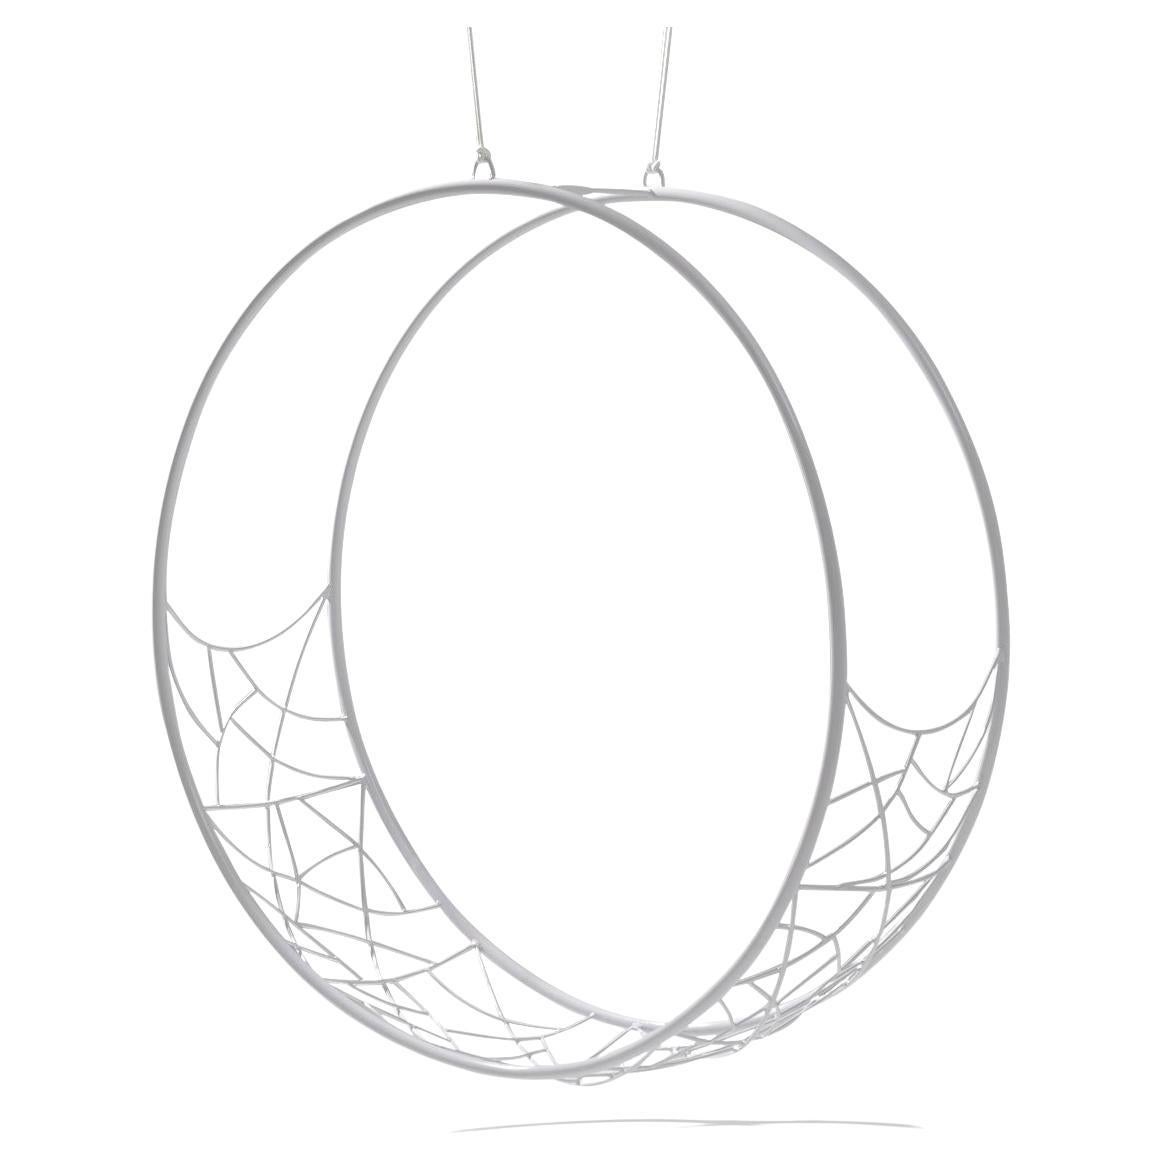 Modern Circular Hanging Chair in Pieces for Economic Shipping